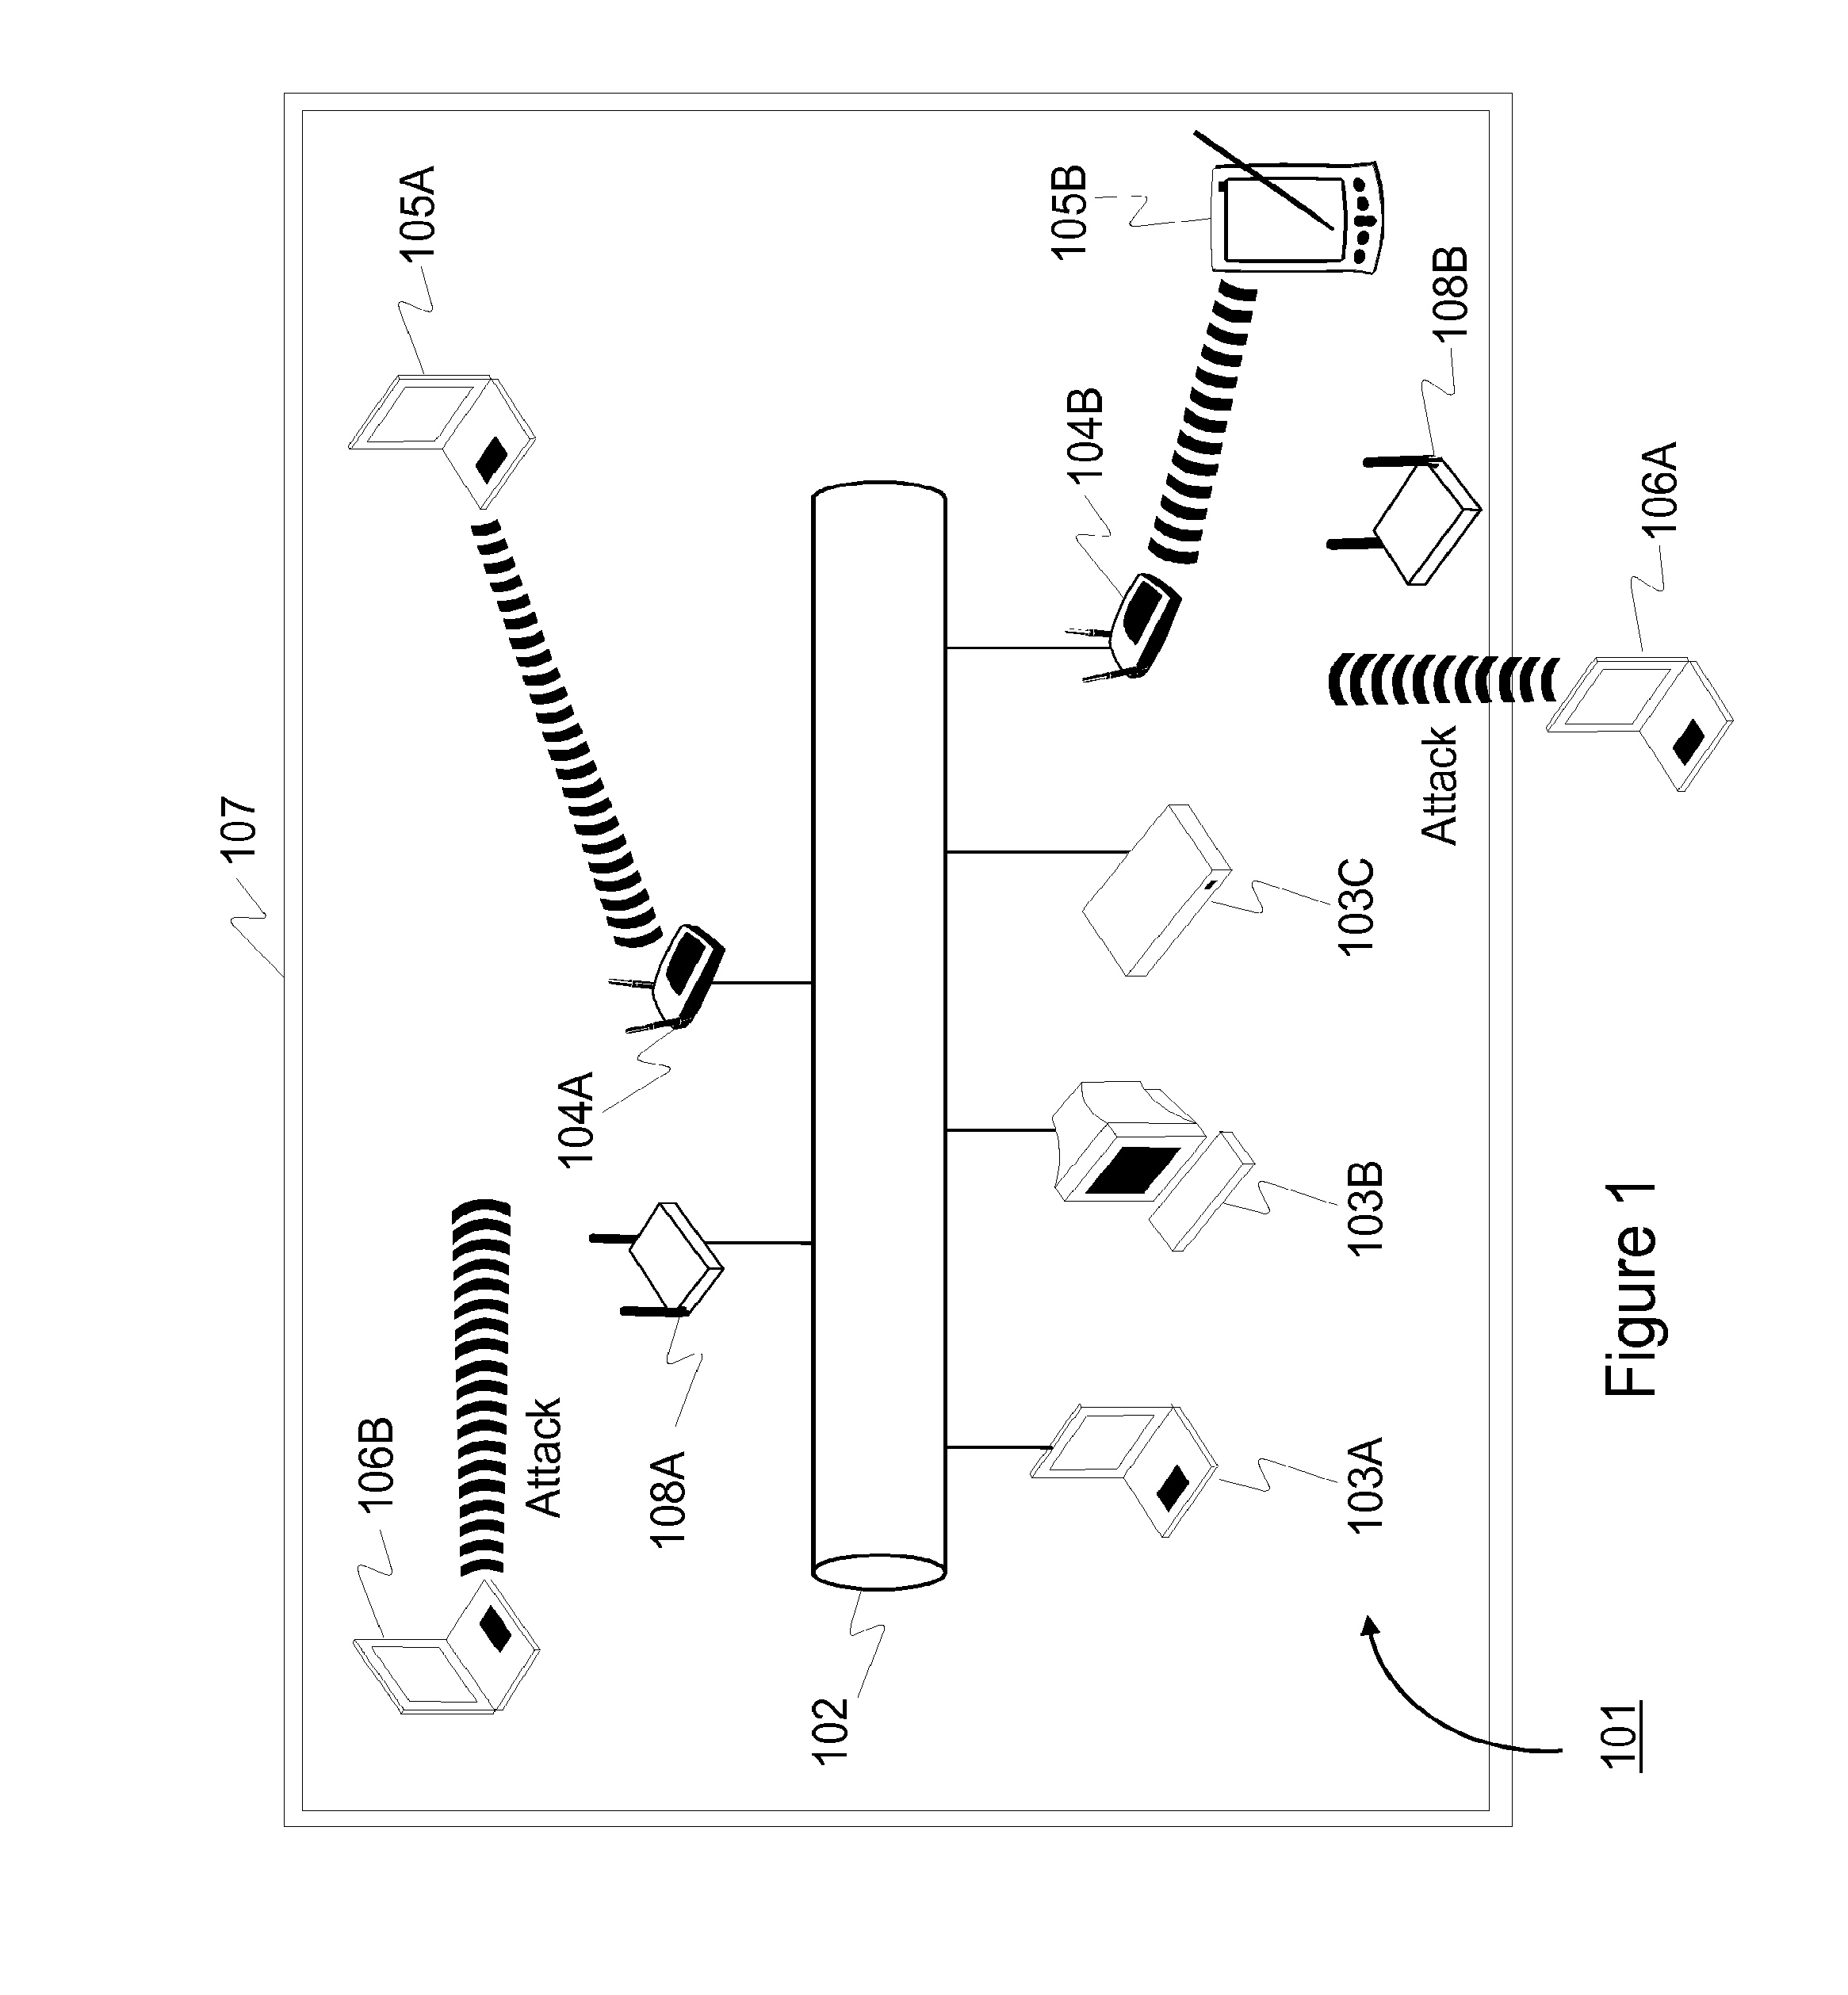 Method and system for detecting address rotation and related events in communication networks